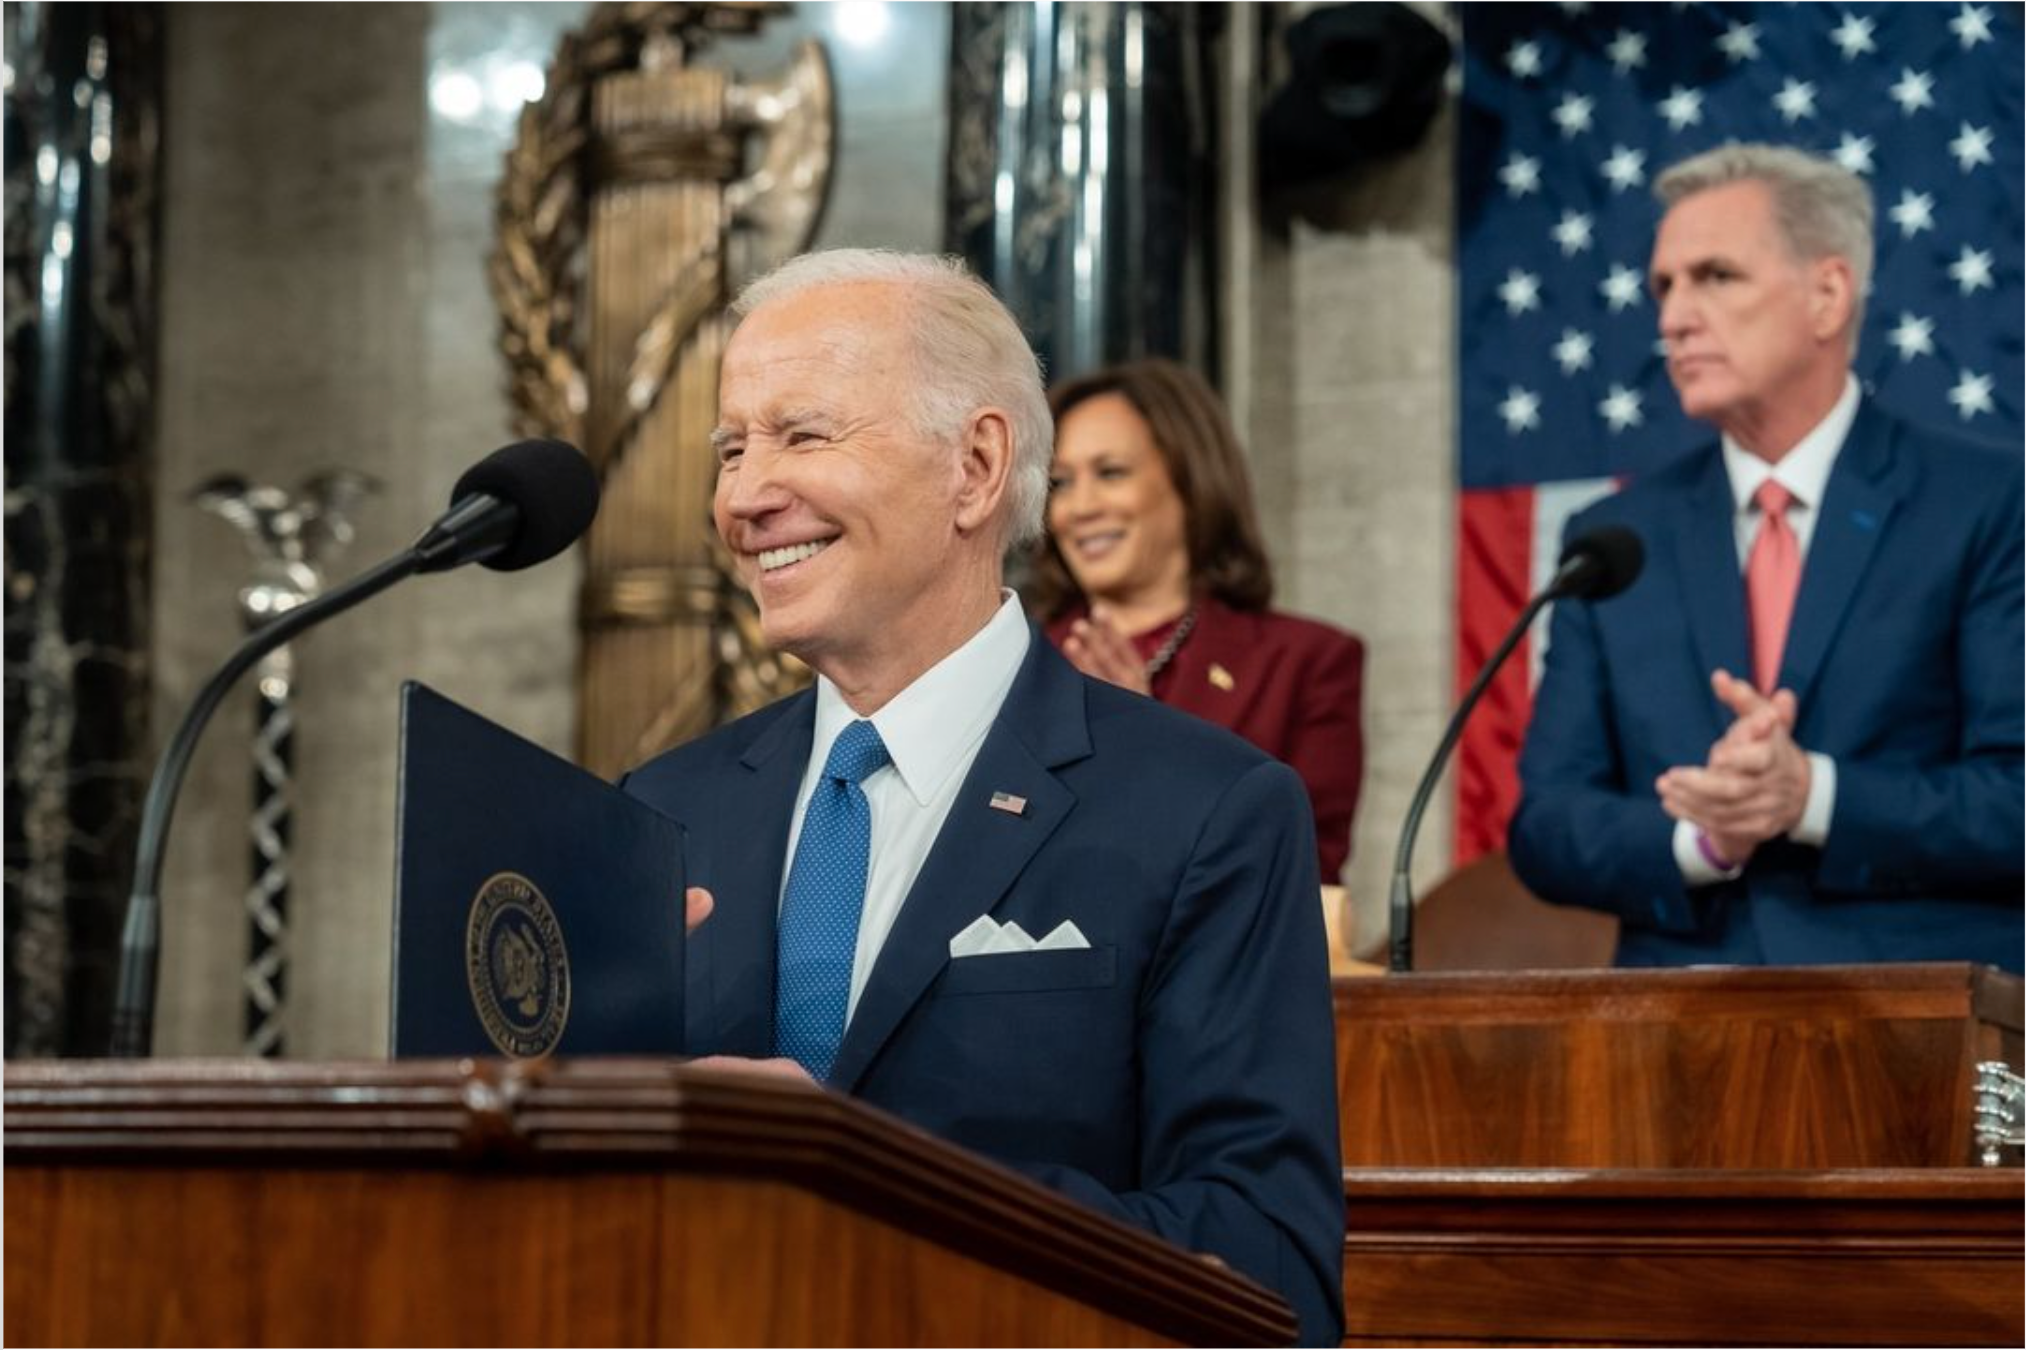 President Joe Biden delivers his State of the Union Address to the House of Representatives.